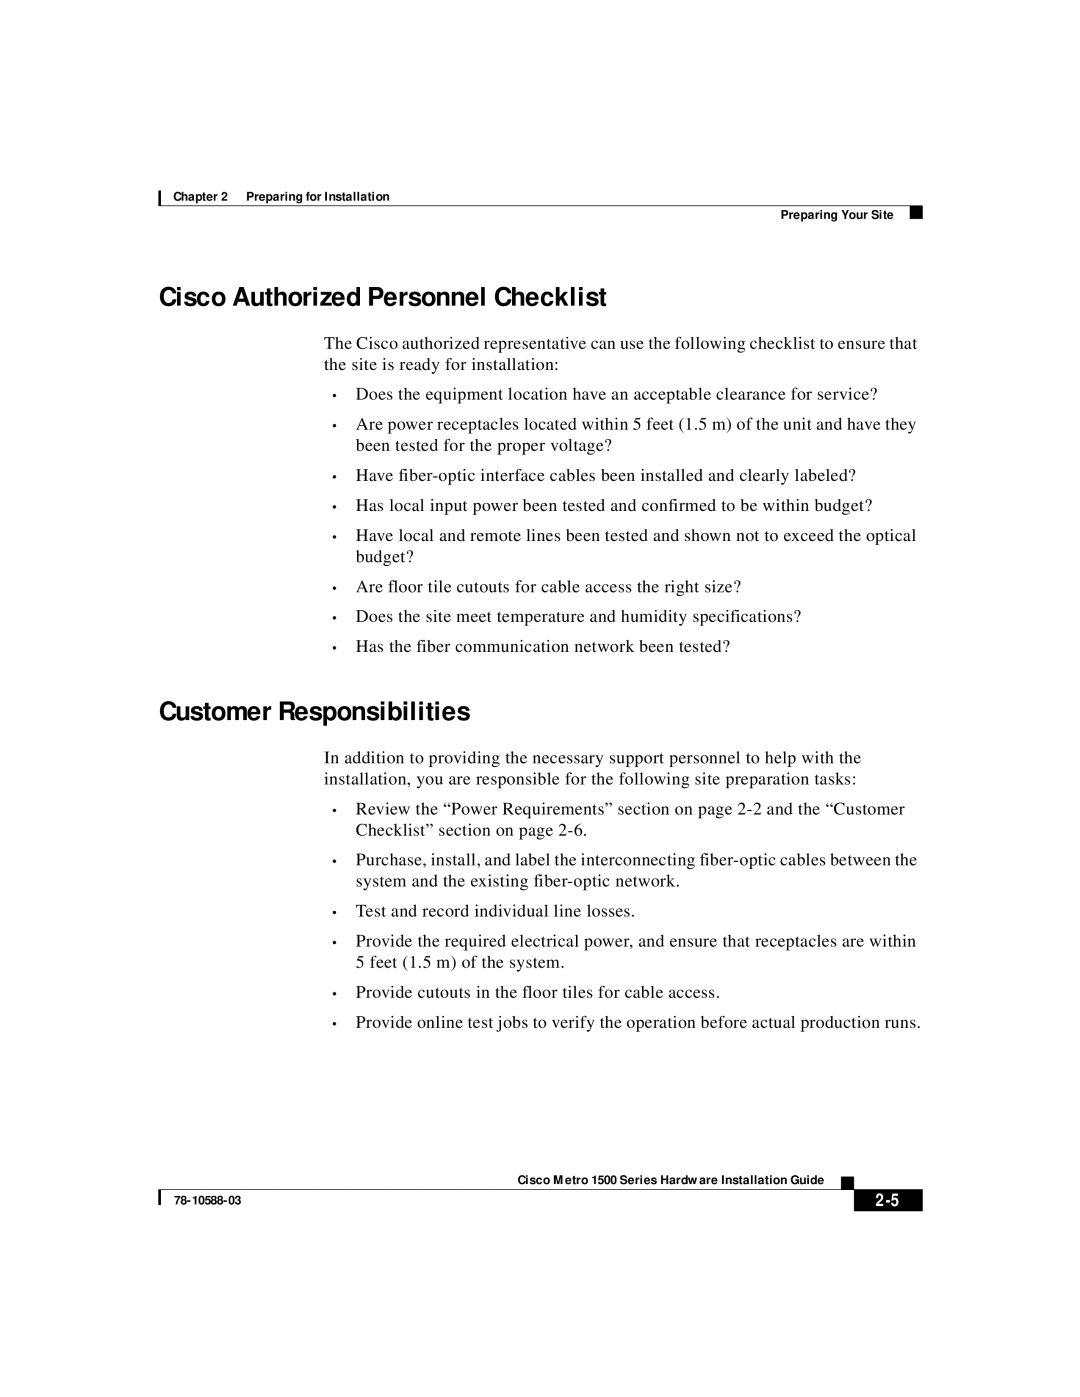 Cisco Systems 1500 manual Cisco Authorized Personnel Checklist, Customer Responsibilities 